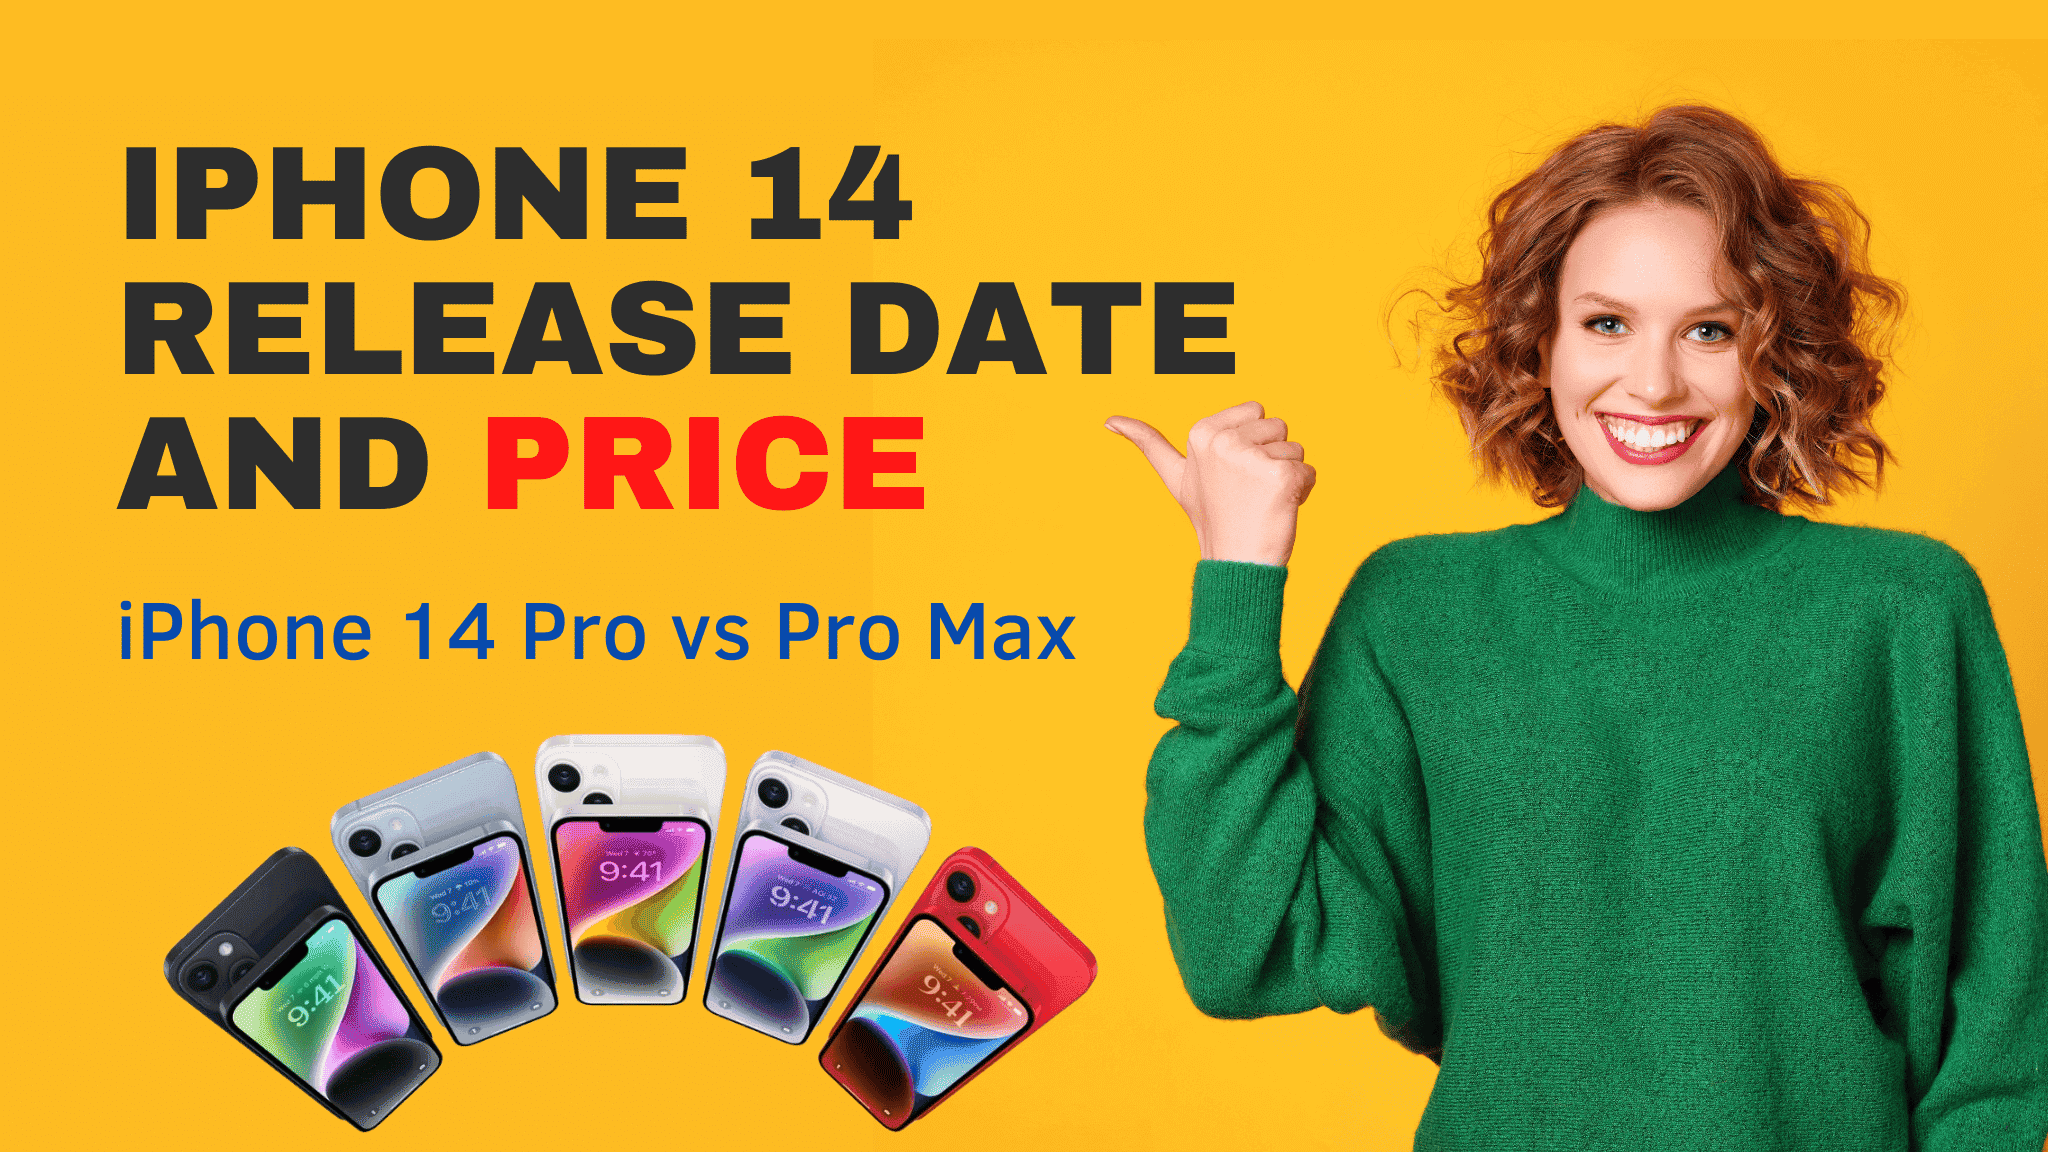 iPhone 14 Pro vs iPhone Pro Max | Prices and Specification in Details